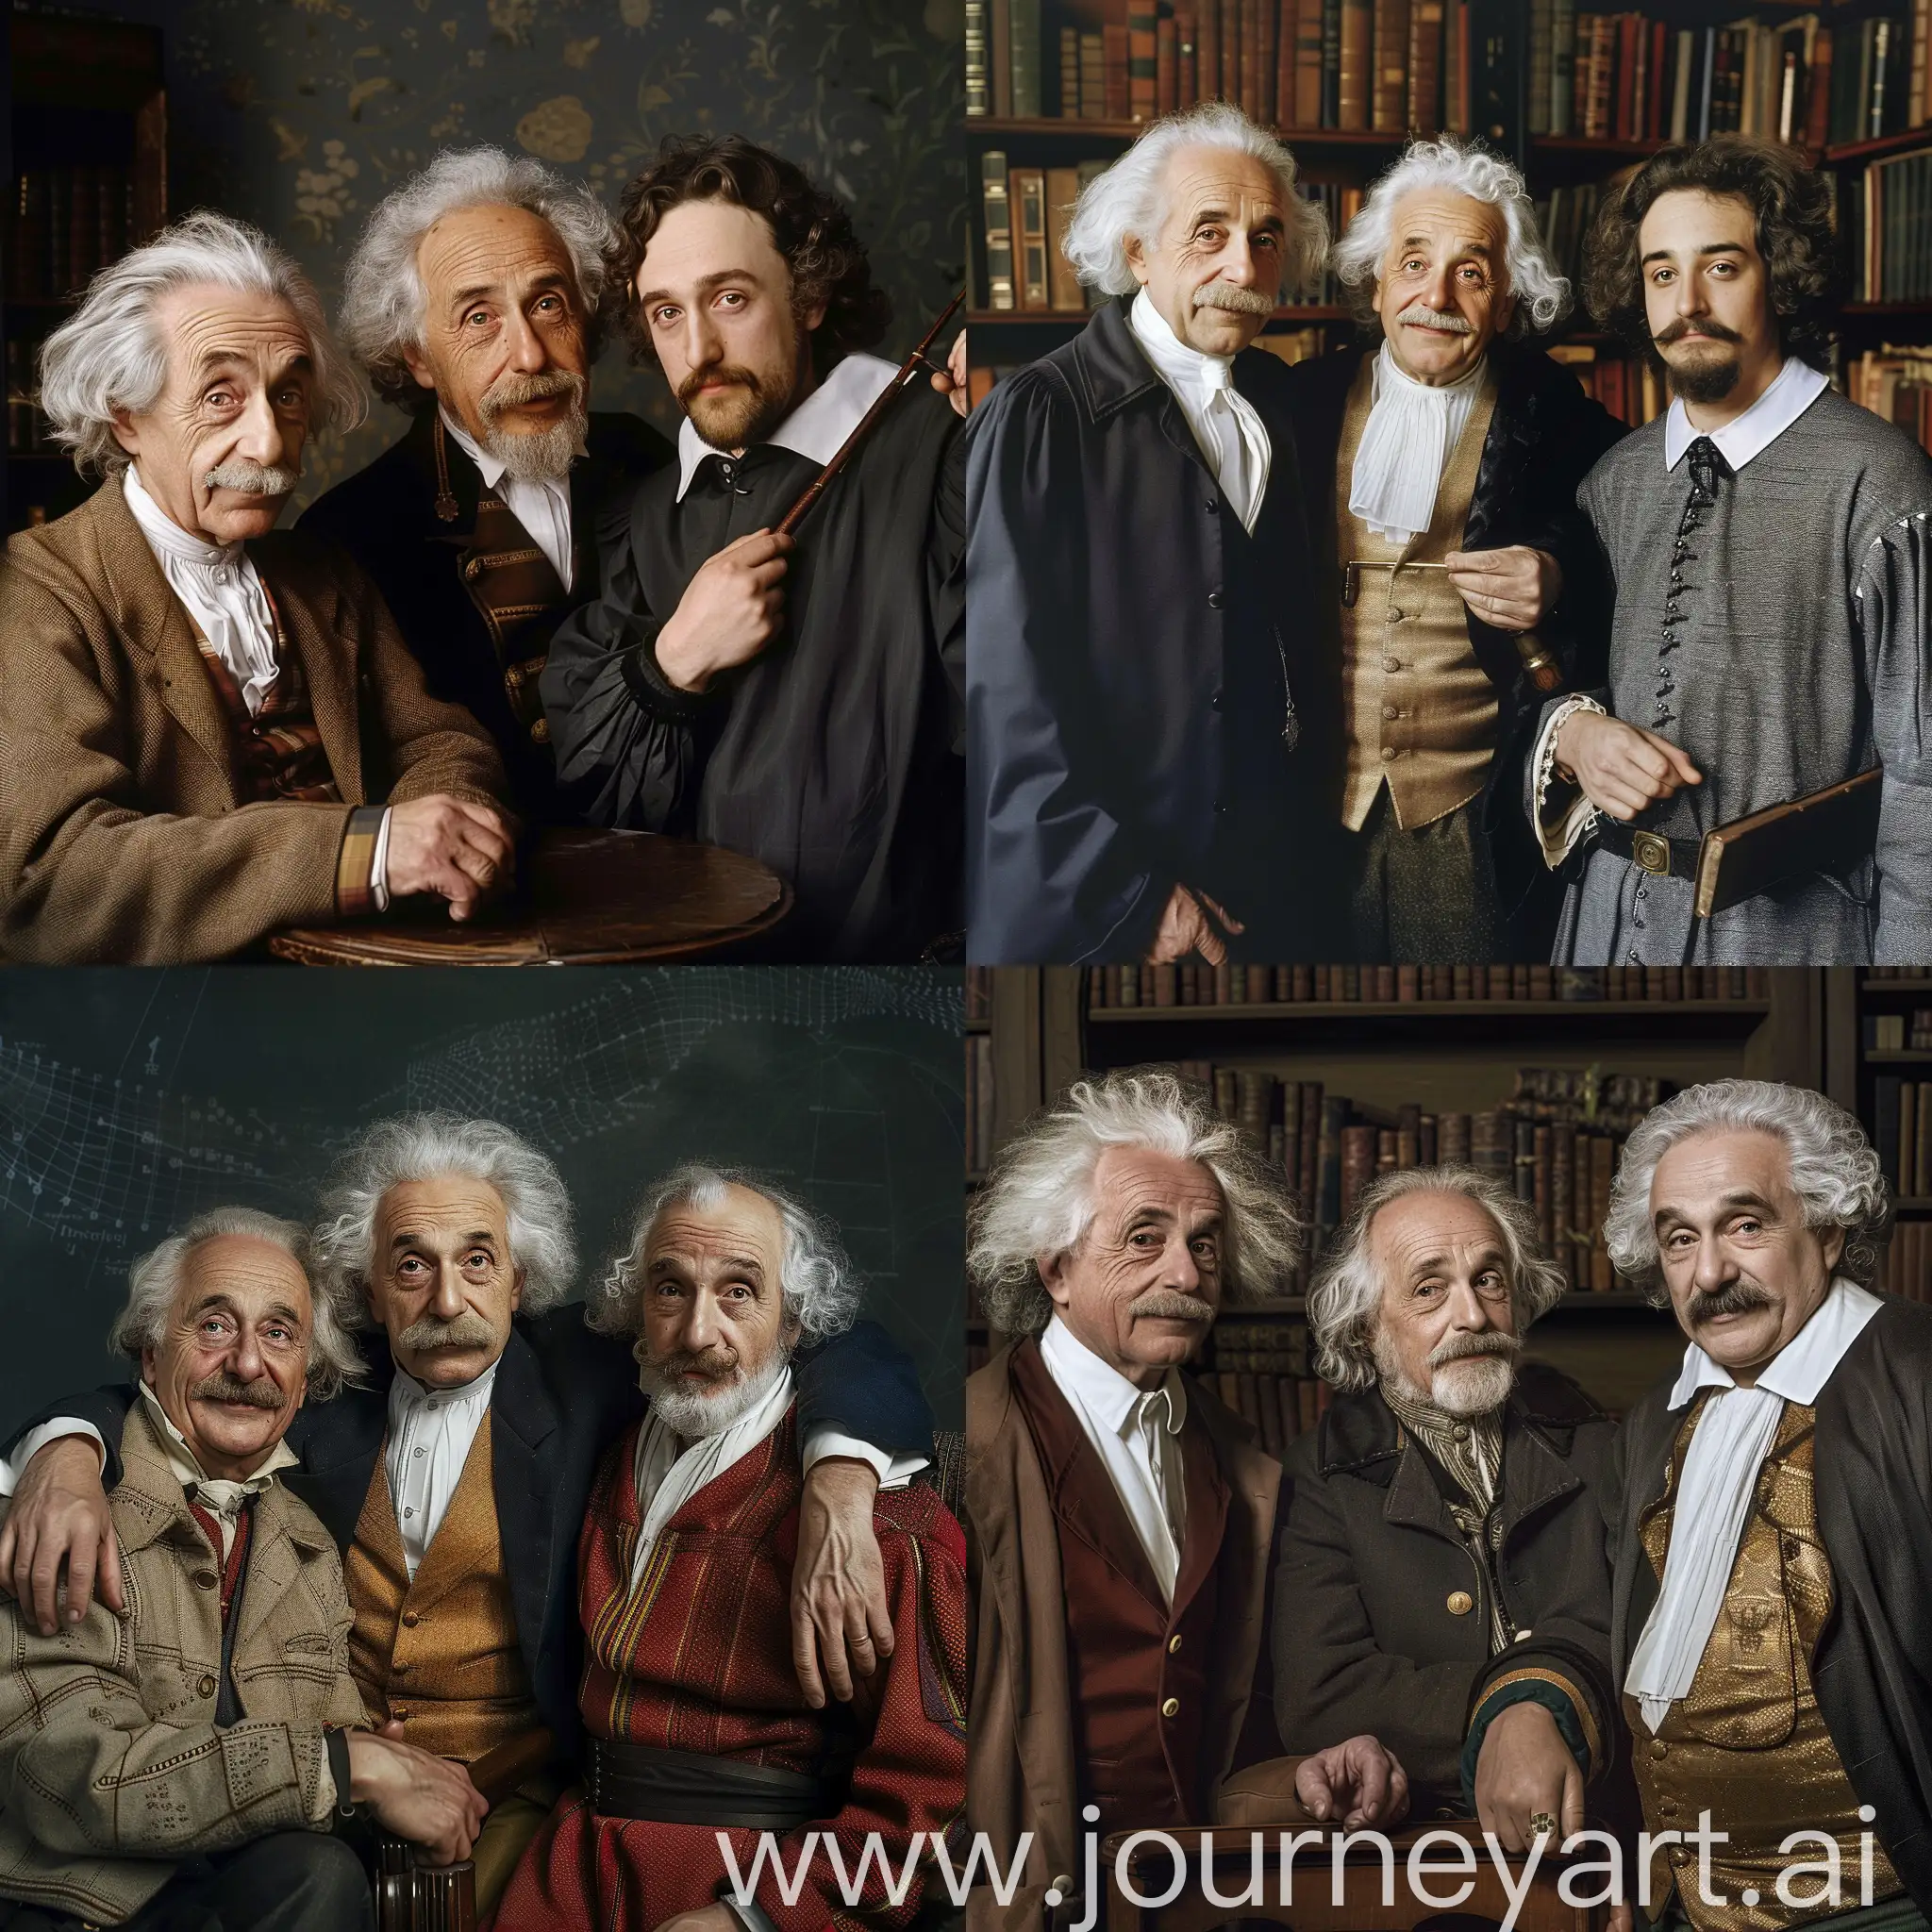 Einstein-Gauss-and-Shakespeare-in-a-Thoughtful-Encounter